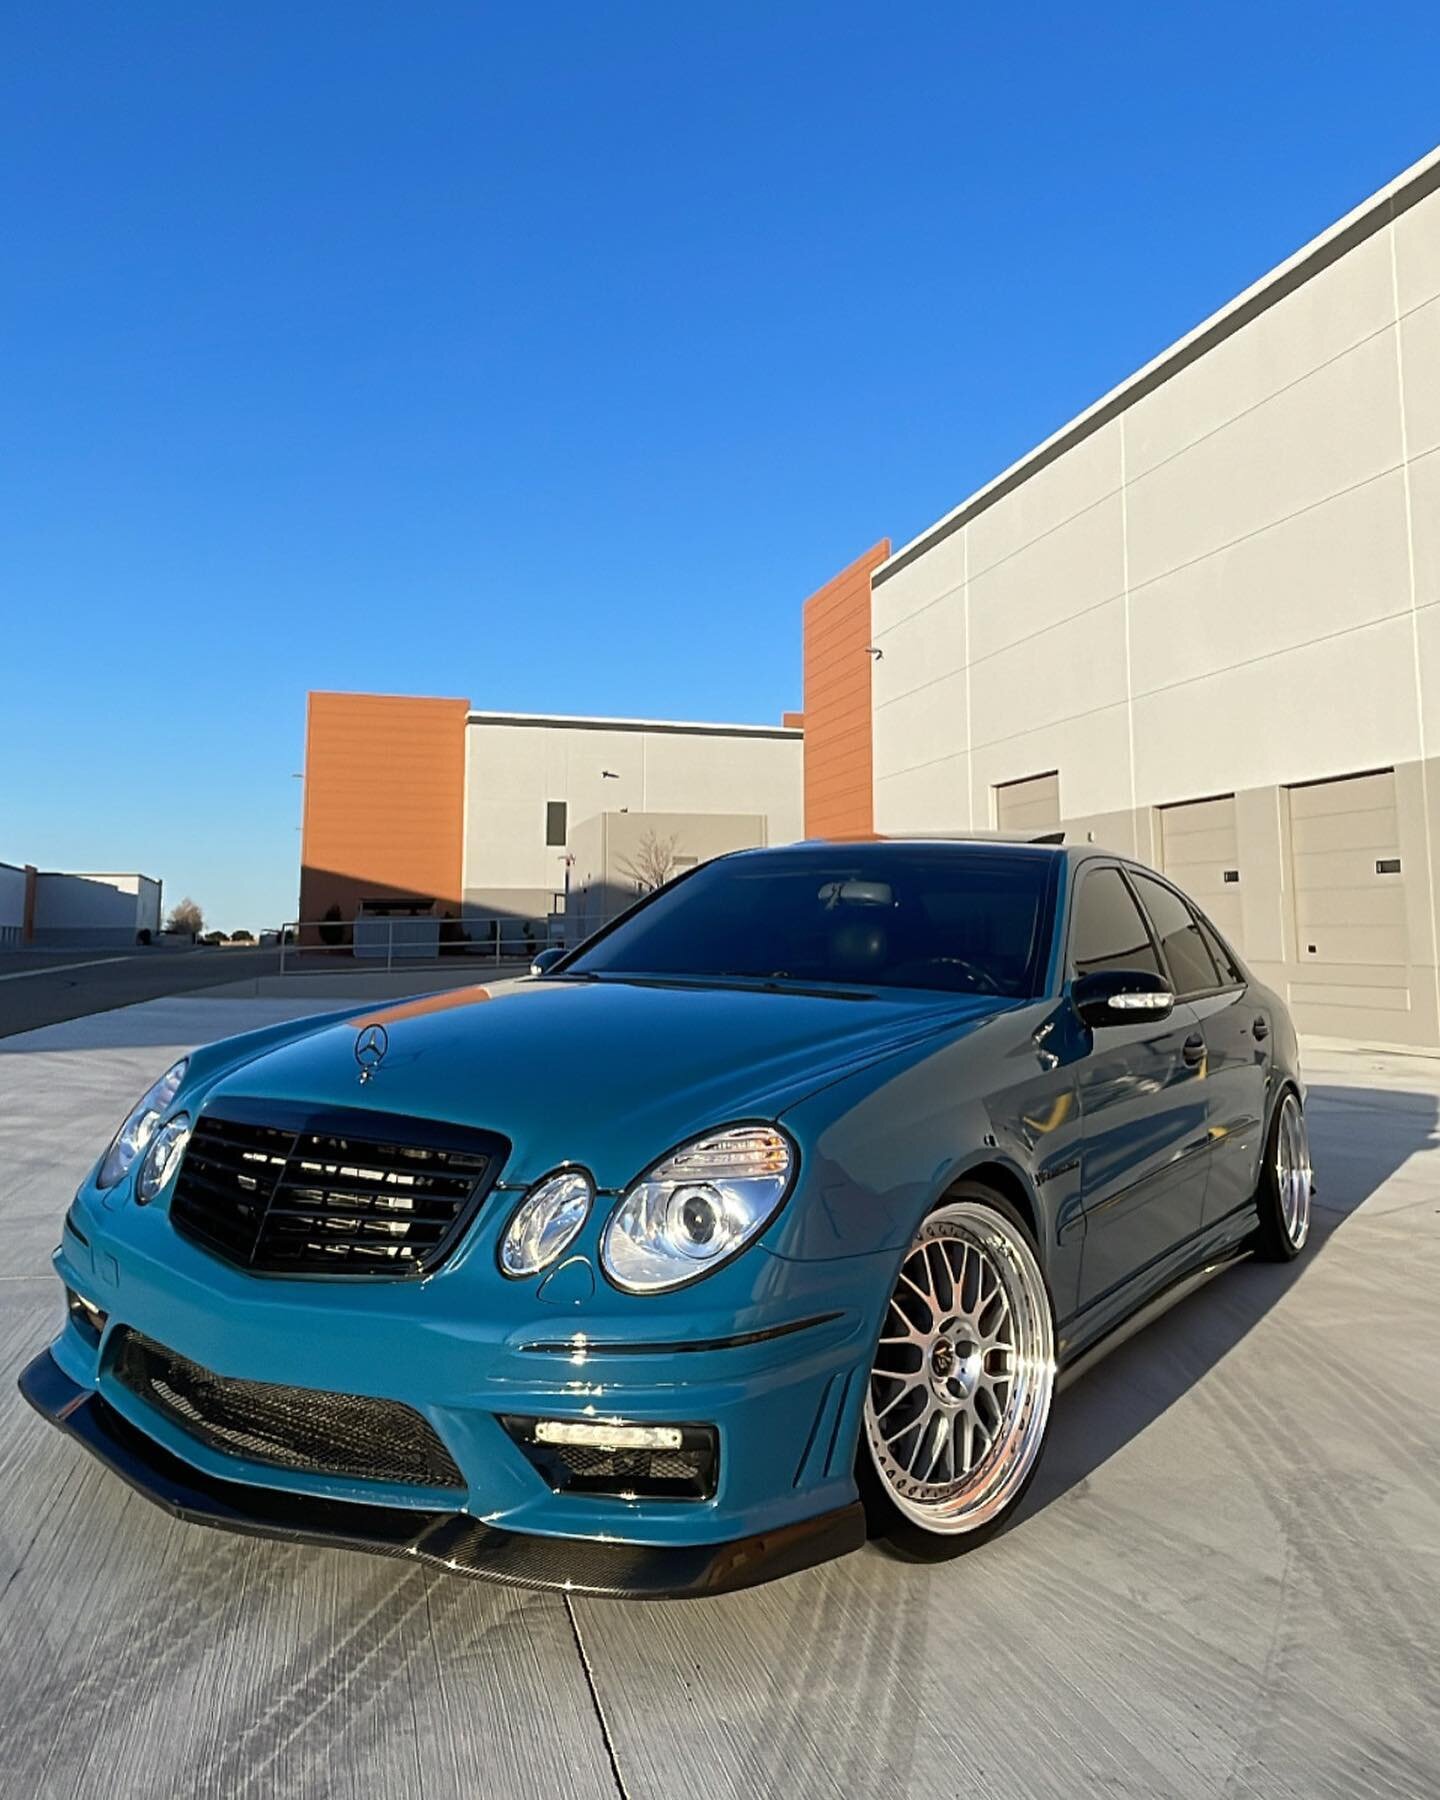 MB E55 AMG in for service! This particular example has a great gloss blue wrap over the original paint. We performed a wrap correction, polish, &amp; a fresh layer of @carpro_official &ldquo;Skin&rdquo; Ceramic Coating which is a specialized coat mad